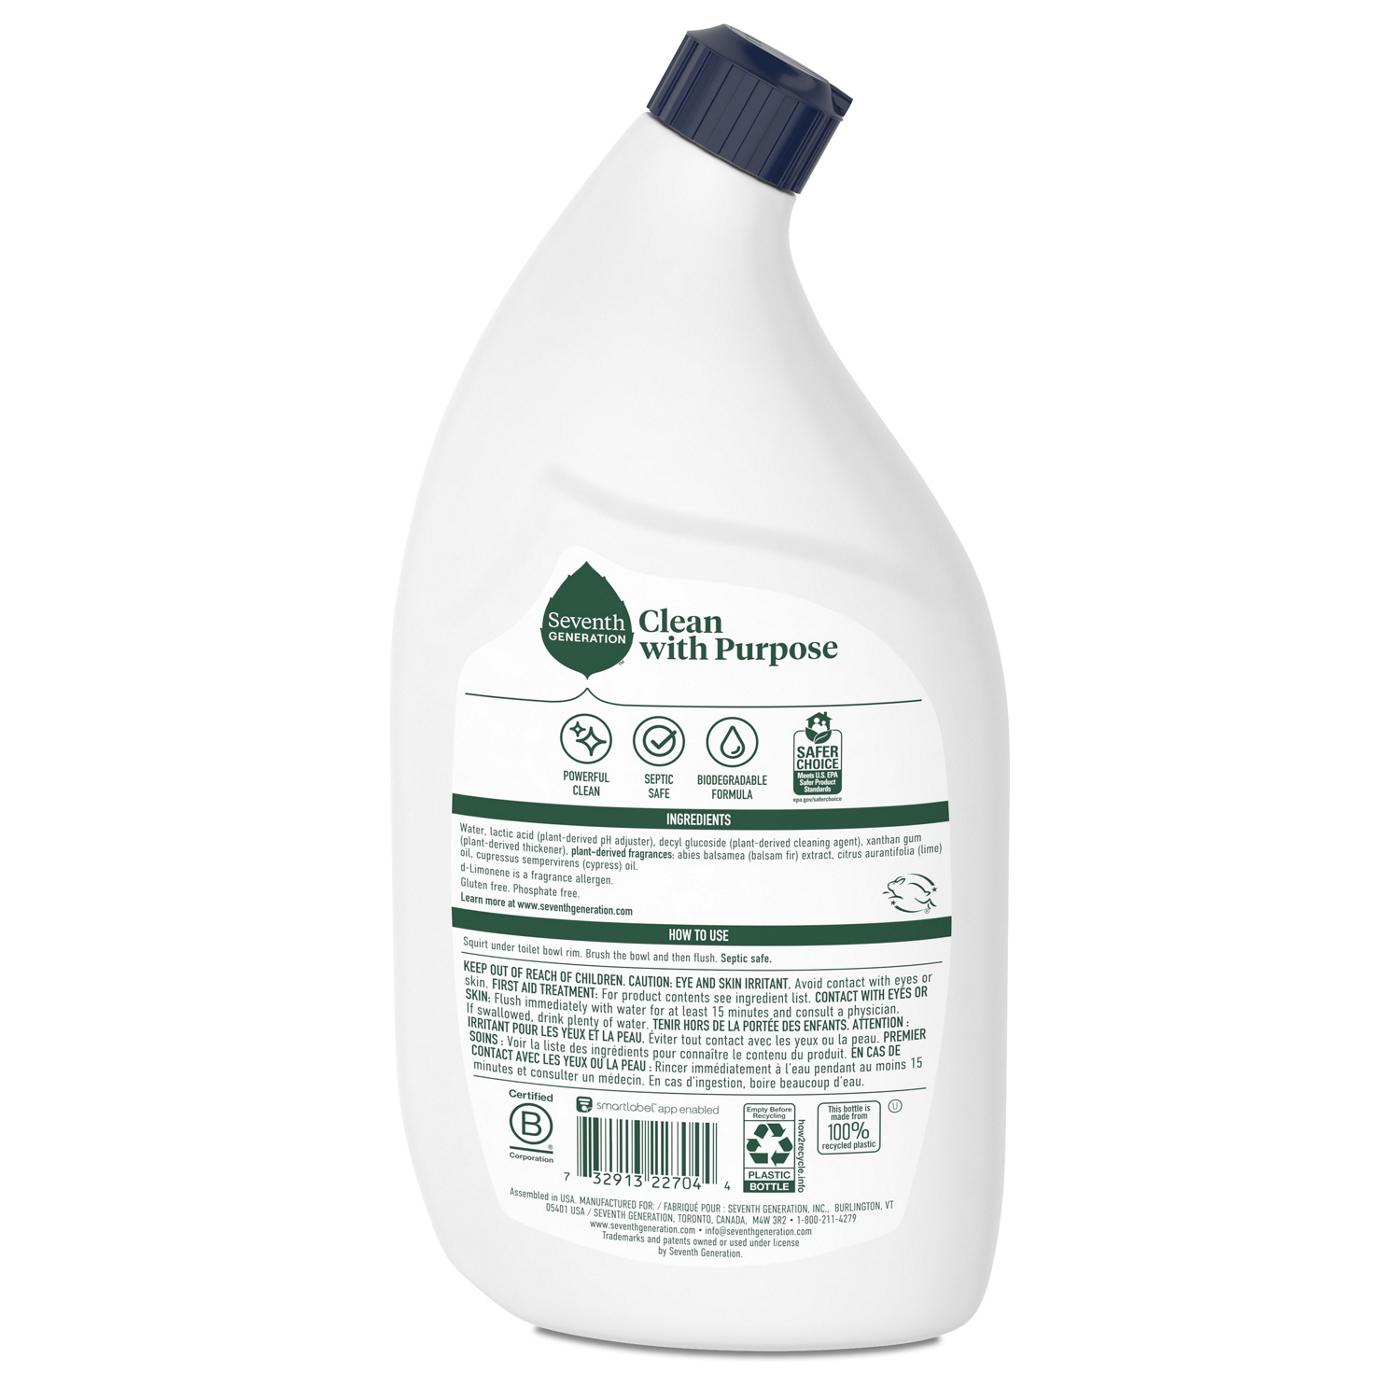 Seventh Generation Emerald Cypress & Fir Toilet Bowl Cleaner; image 6 of 7